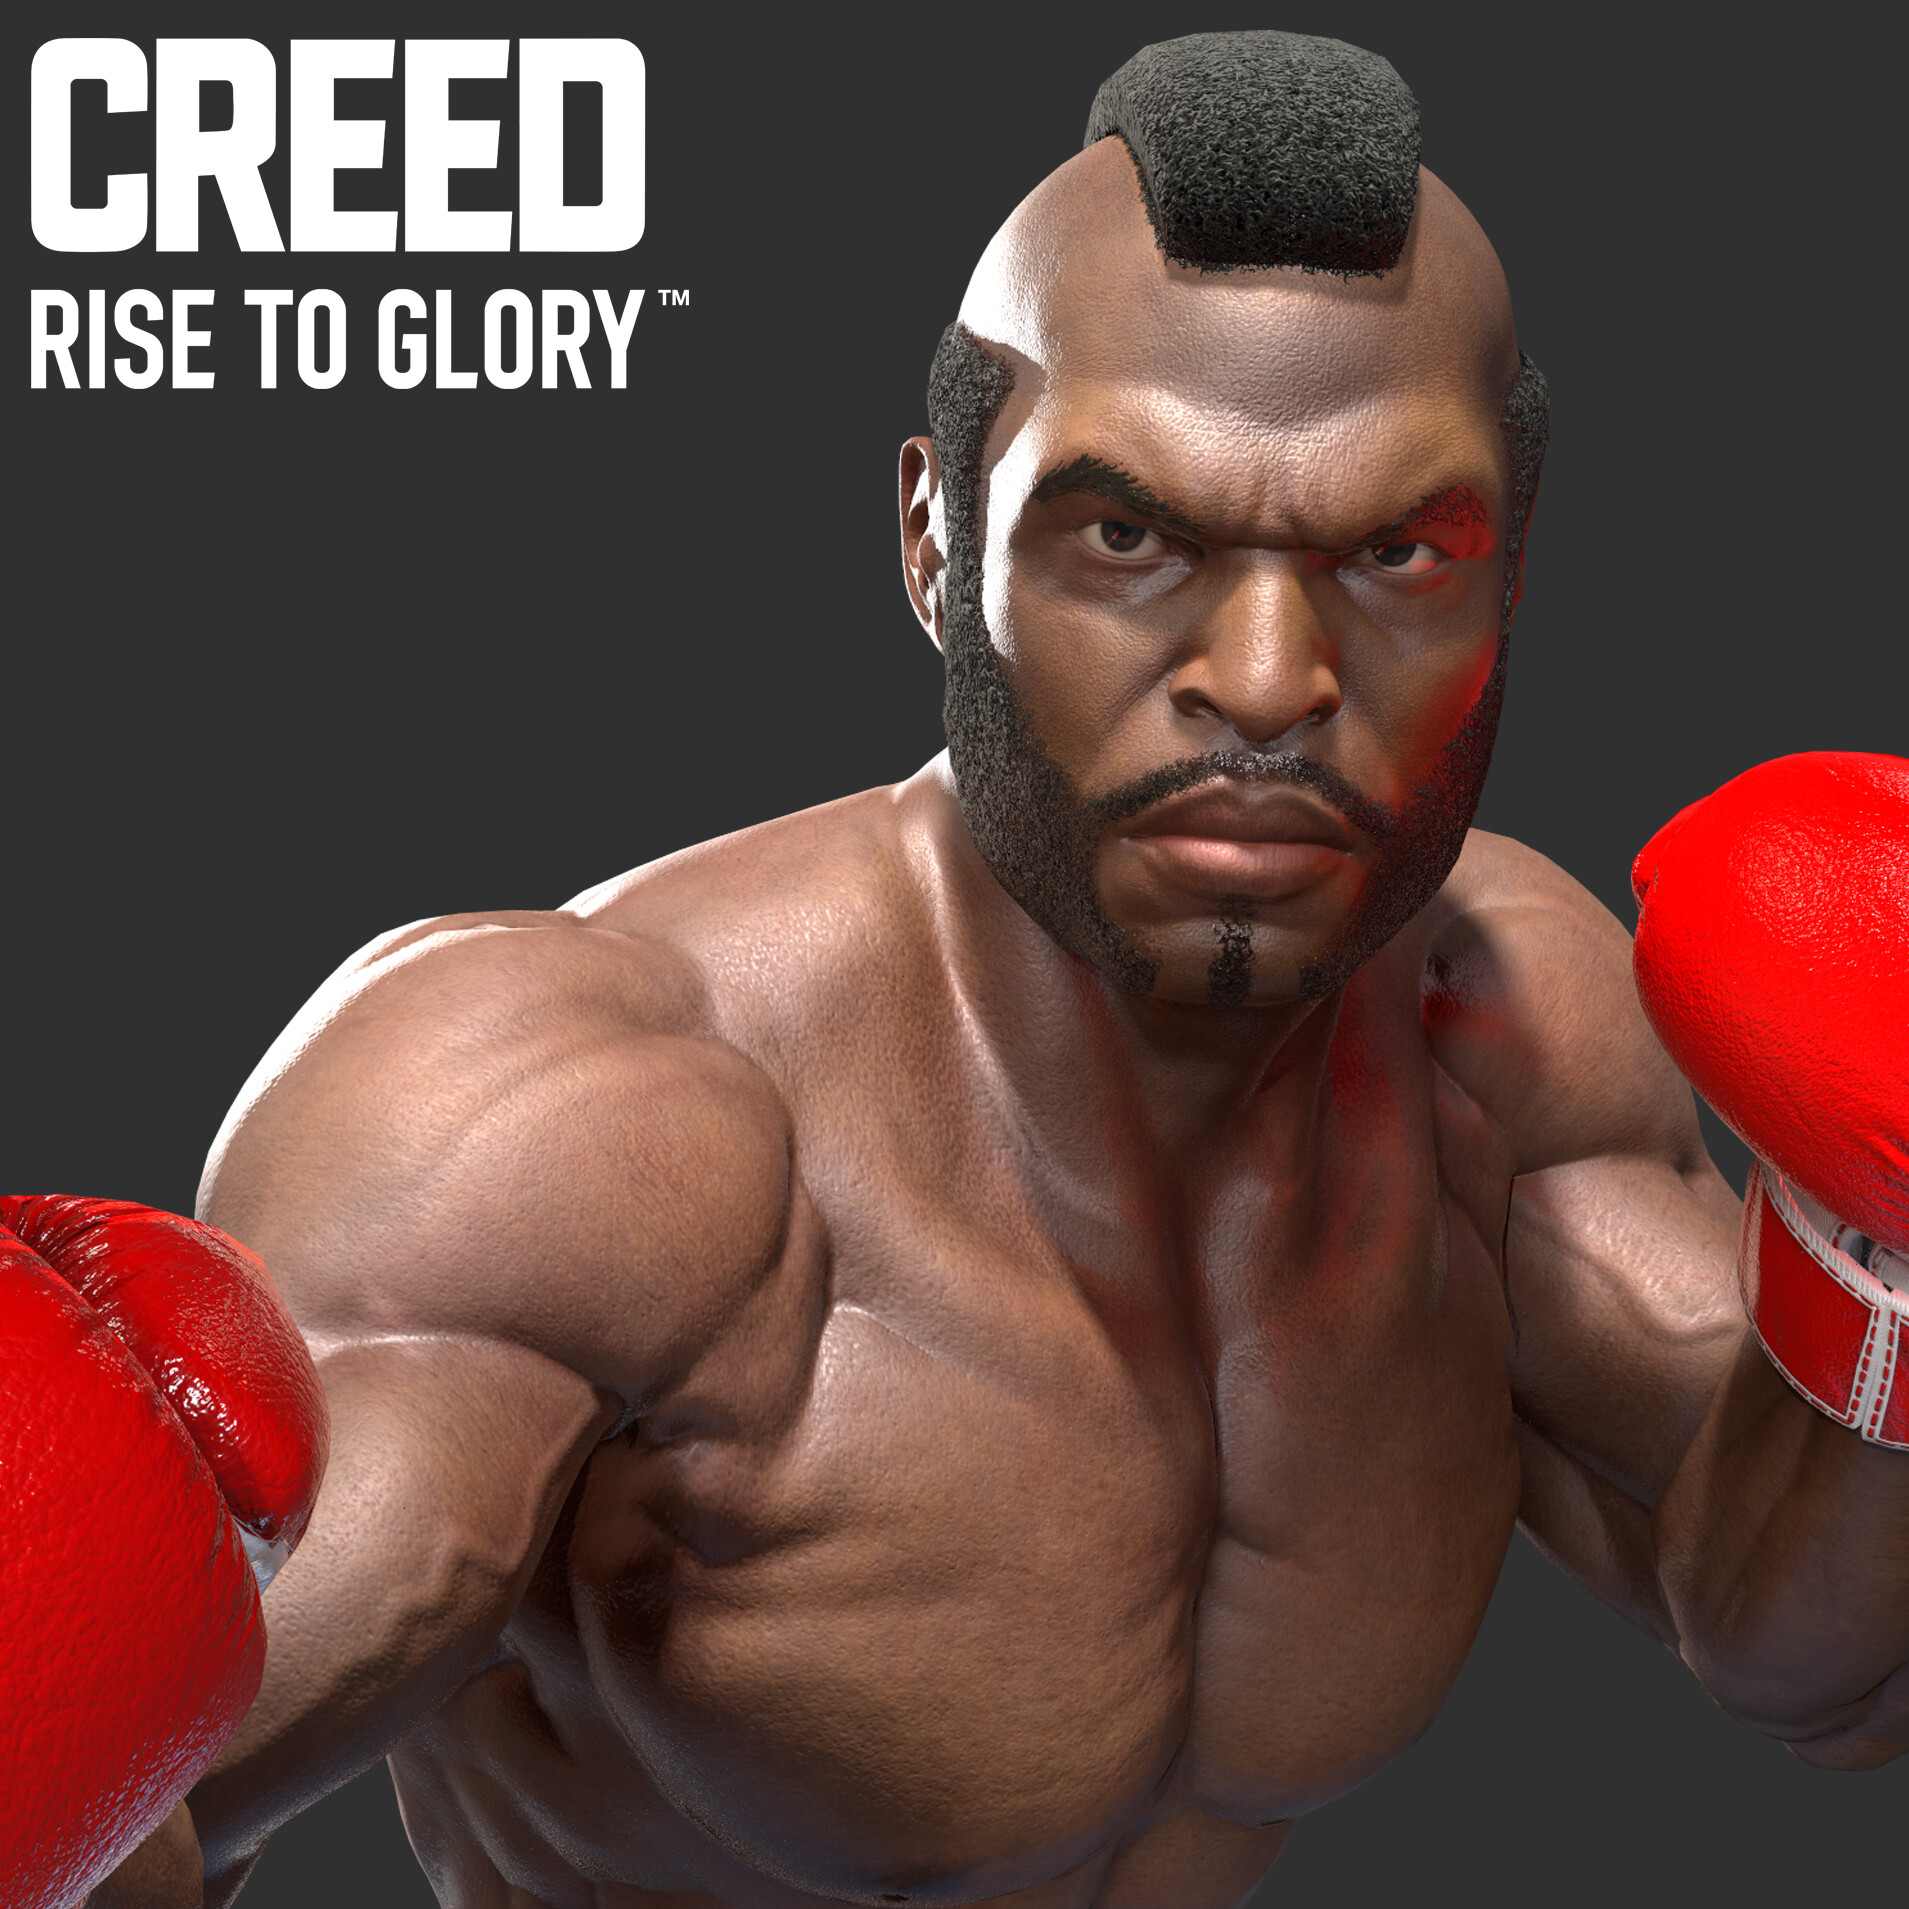 Rise to glory vr. Creed VR. Creed VR игра. Игра Creed Rise to Glory. Игра Creed Rise to Glory в VR.